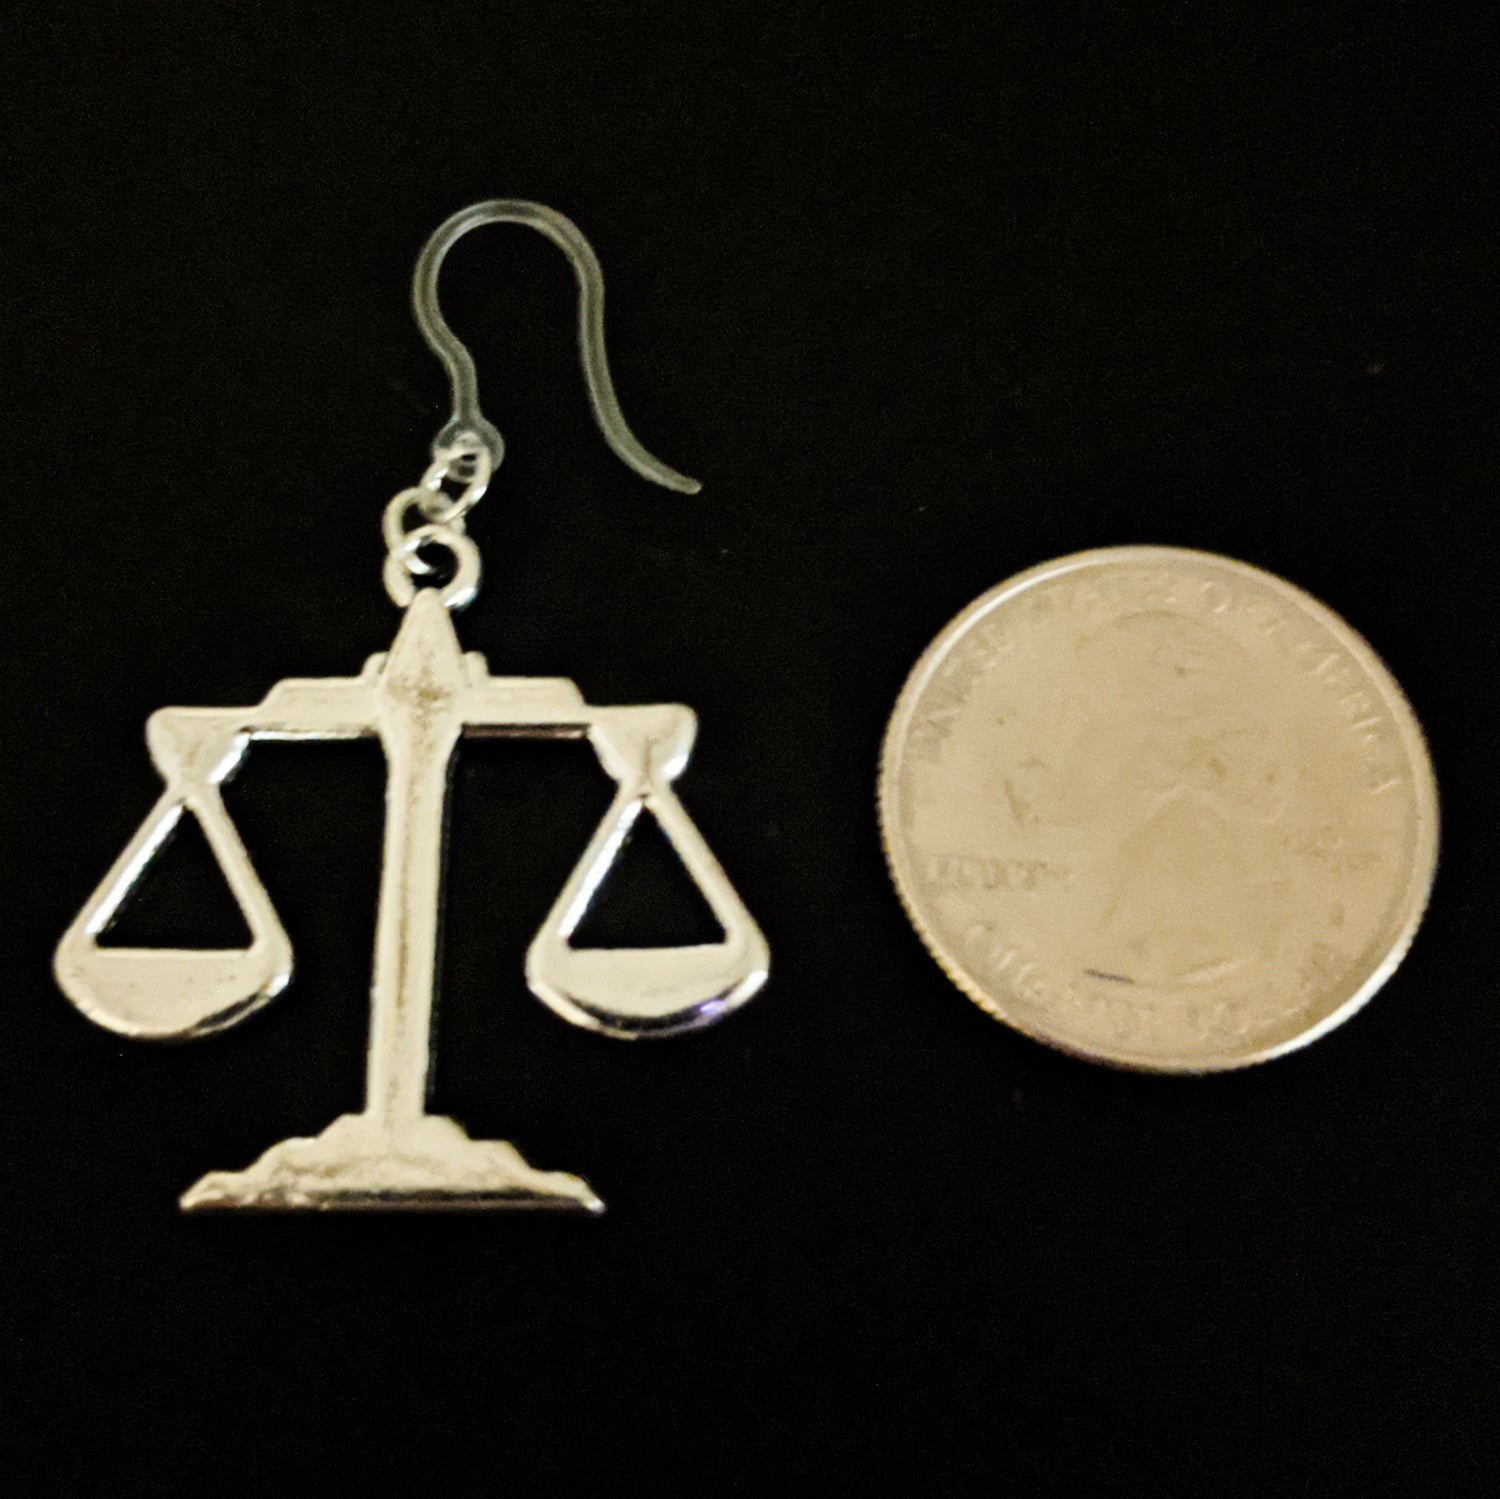 Scales of Justice Earrings (Dangles) - large - size comparison quarter